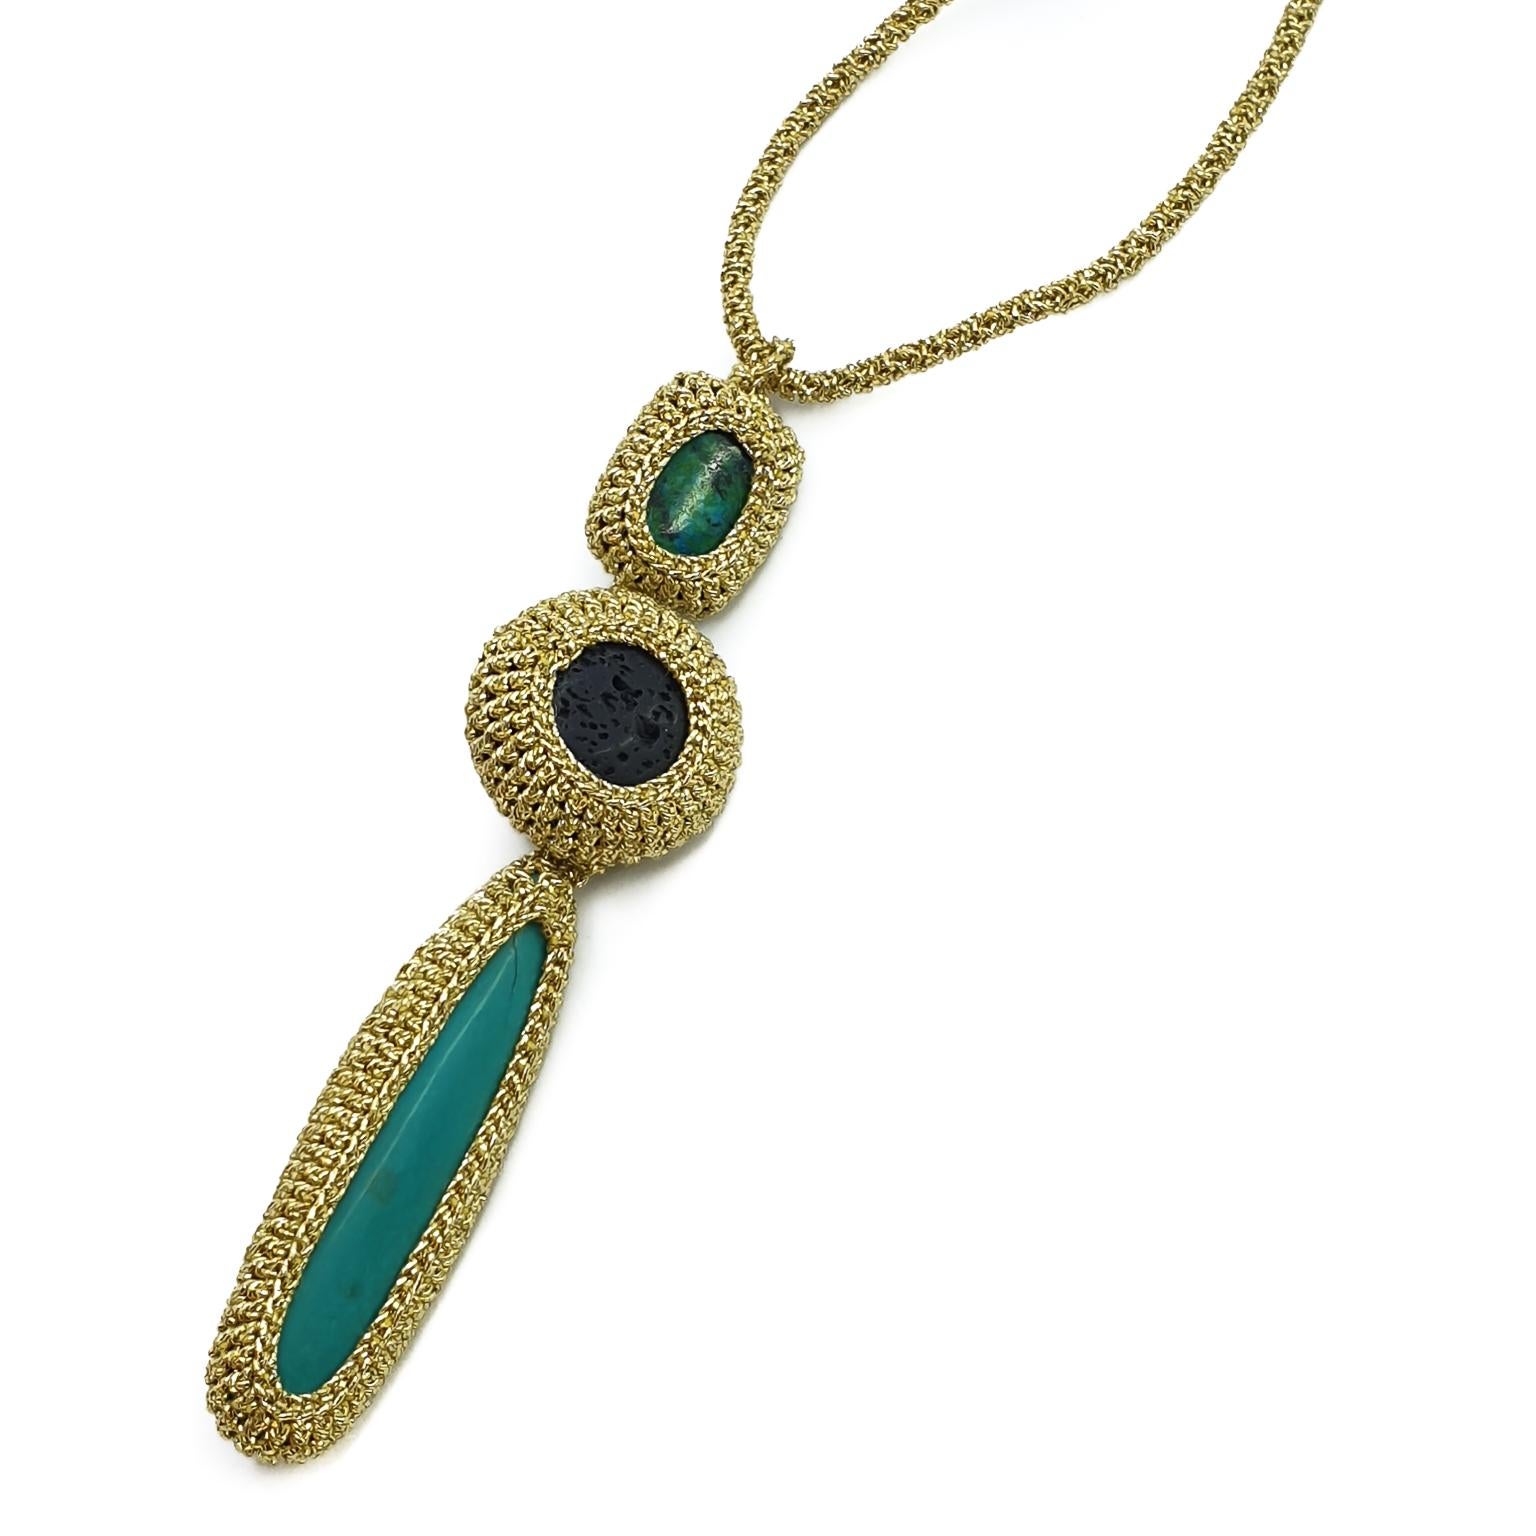 This is a contemporary, classic design crochet pendant necklace. The natural stones are beautifully crochet around in tight stitches emphasizing their colors.

The necklace can be custom made. Choice of stones can be selected.

The necklace is